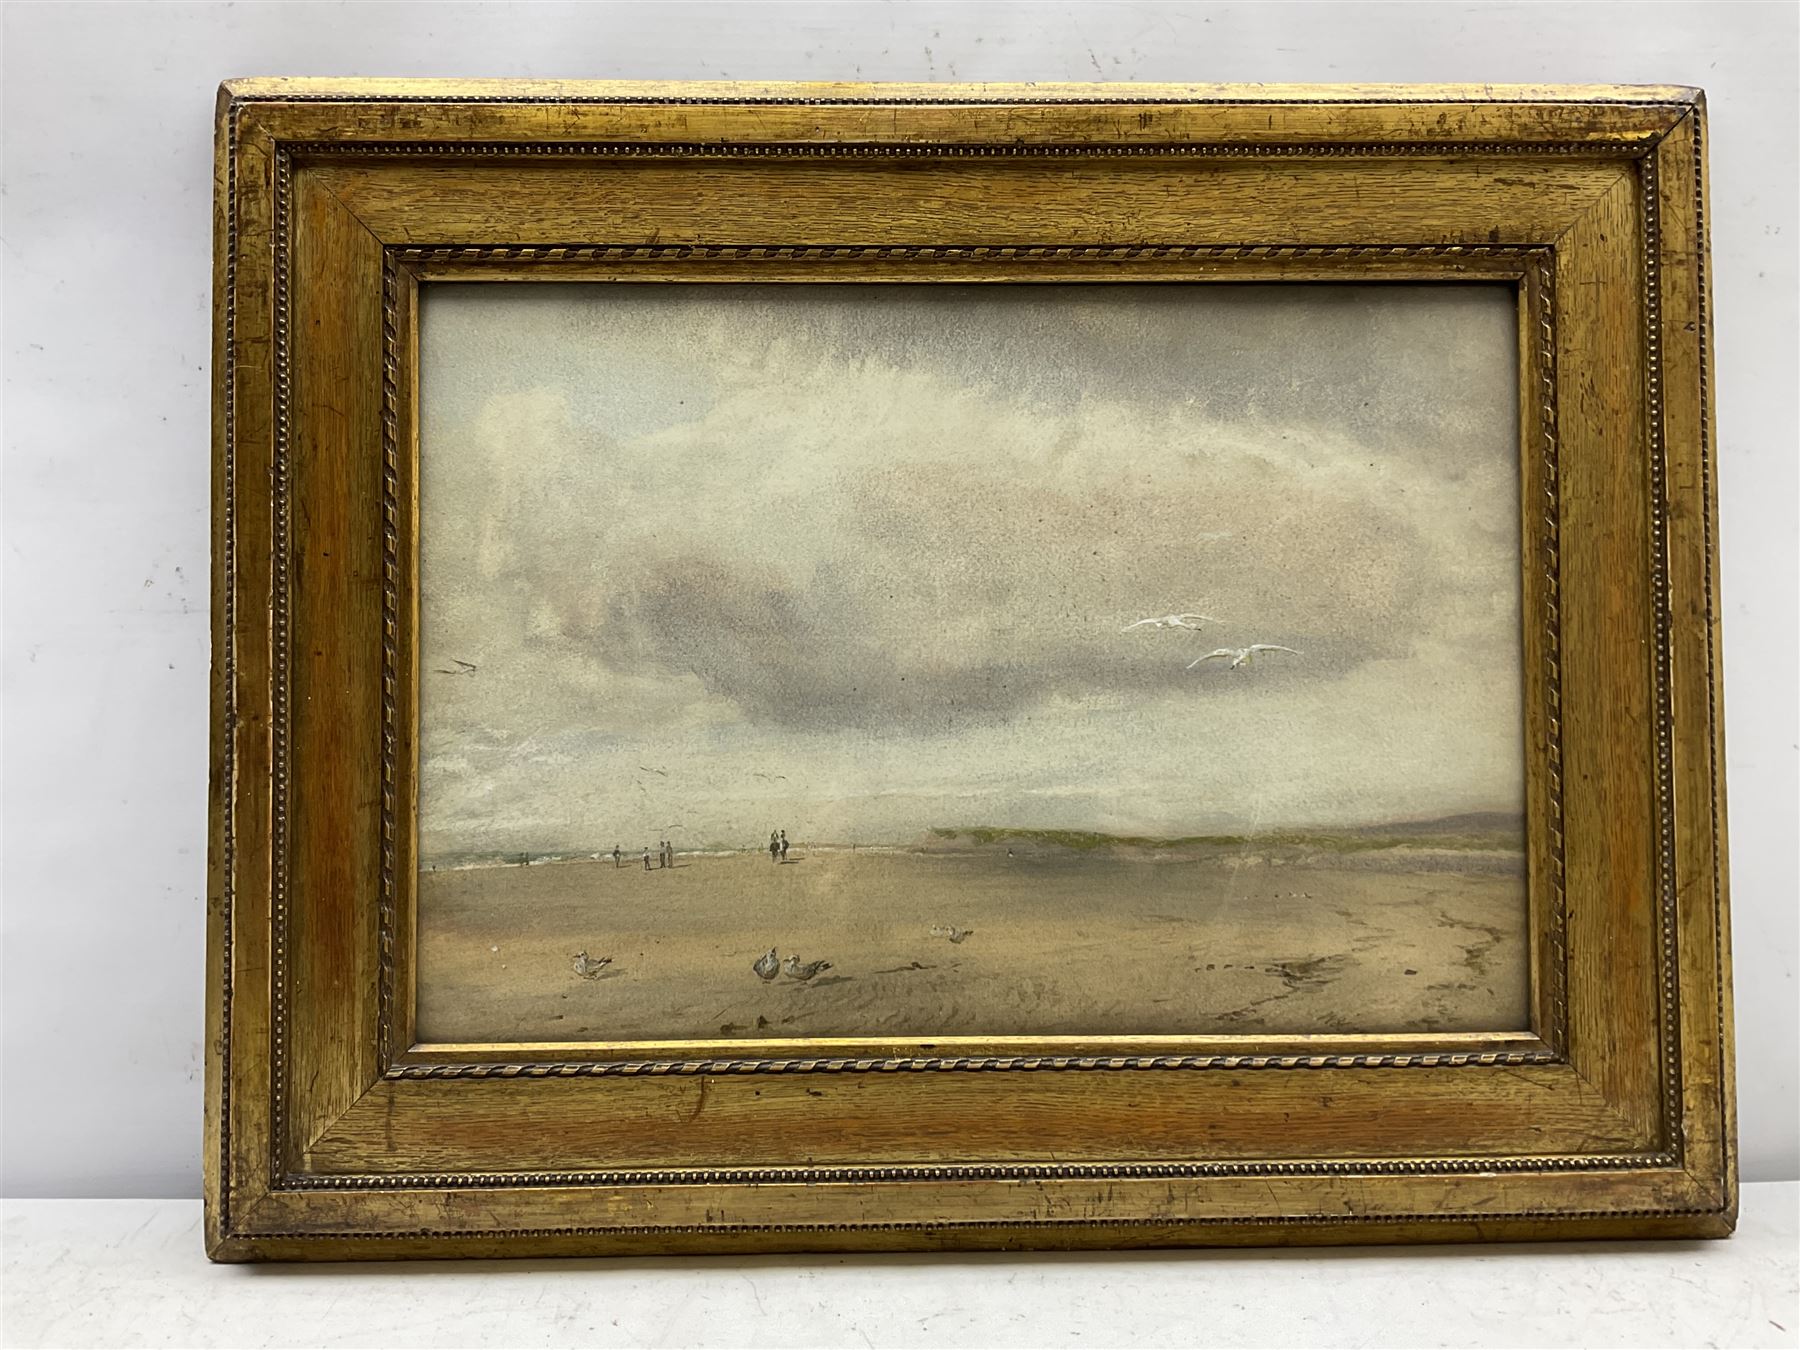 Attrib. Wilfrid Williams Ball (British 1853-1917): Open Beach with Geese Seagulls and Figures - Image 2 of 4